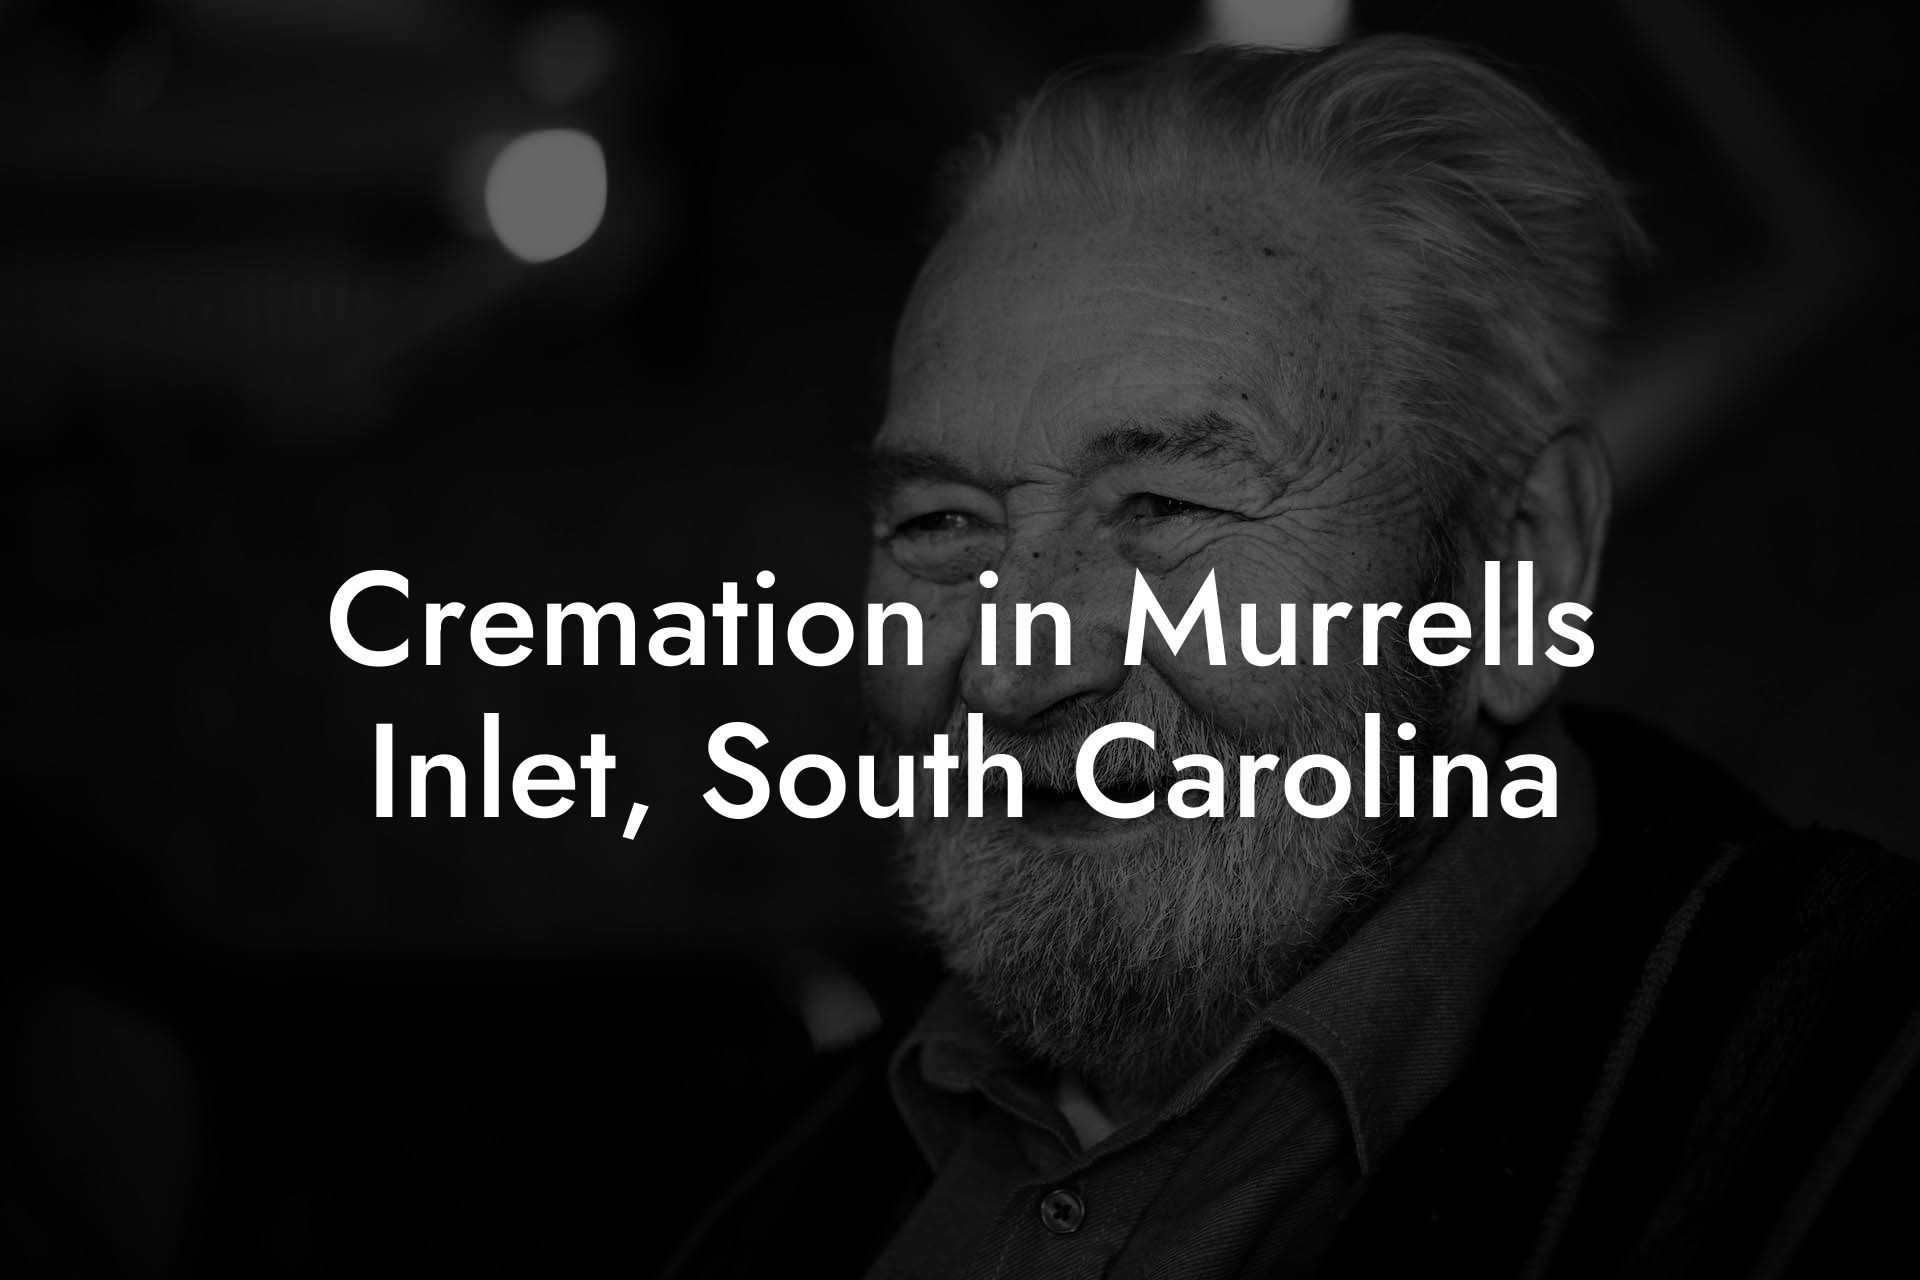 Cremation in Murrells Inlet, South Carolina